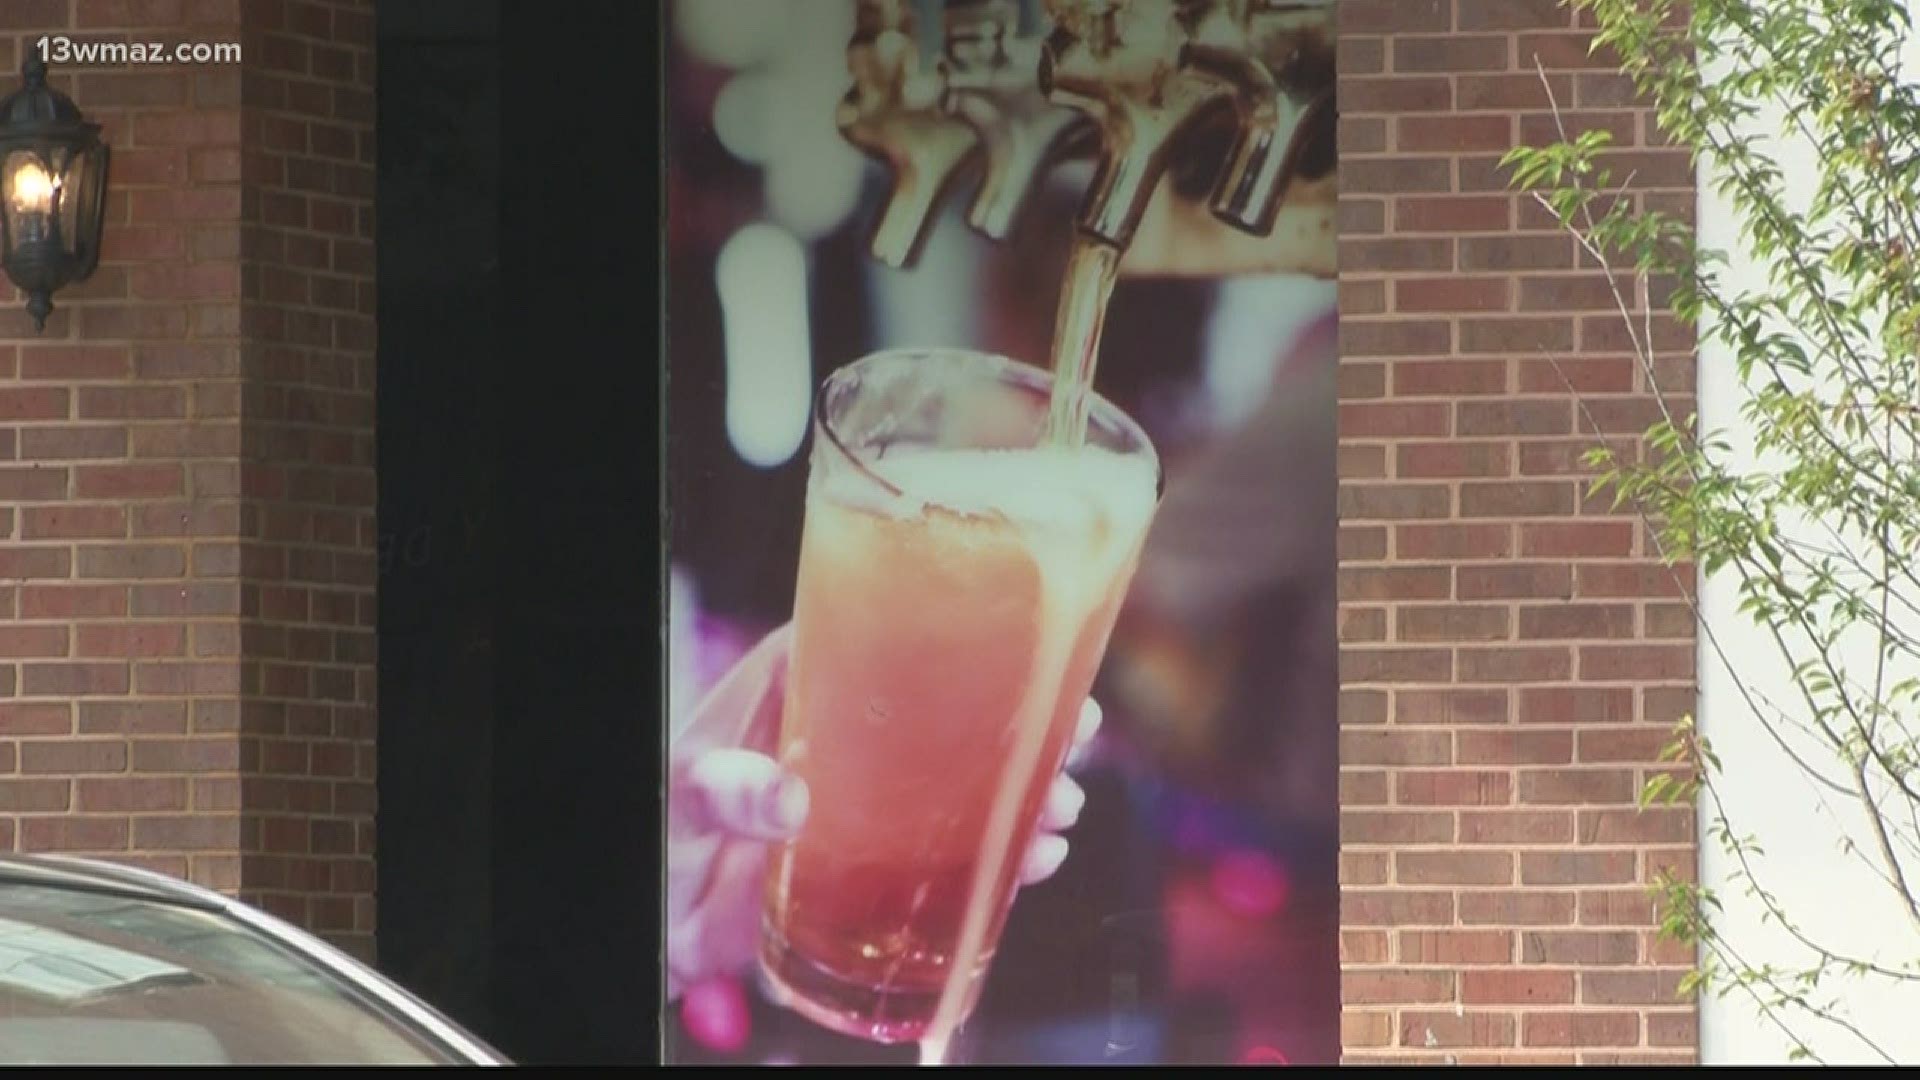 Governor Brian Kemp announced bars and nightclubs can decide to reopen next week.